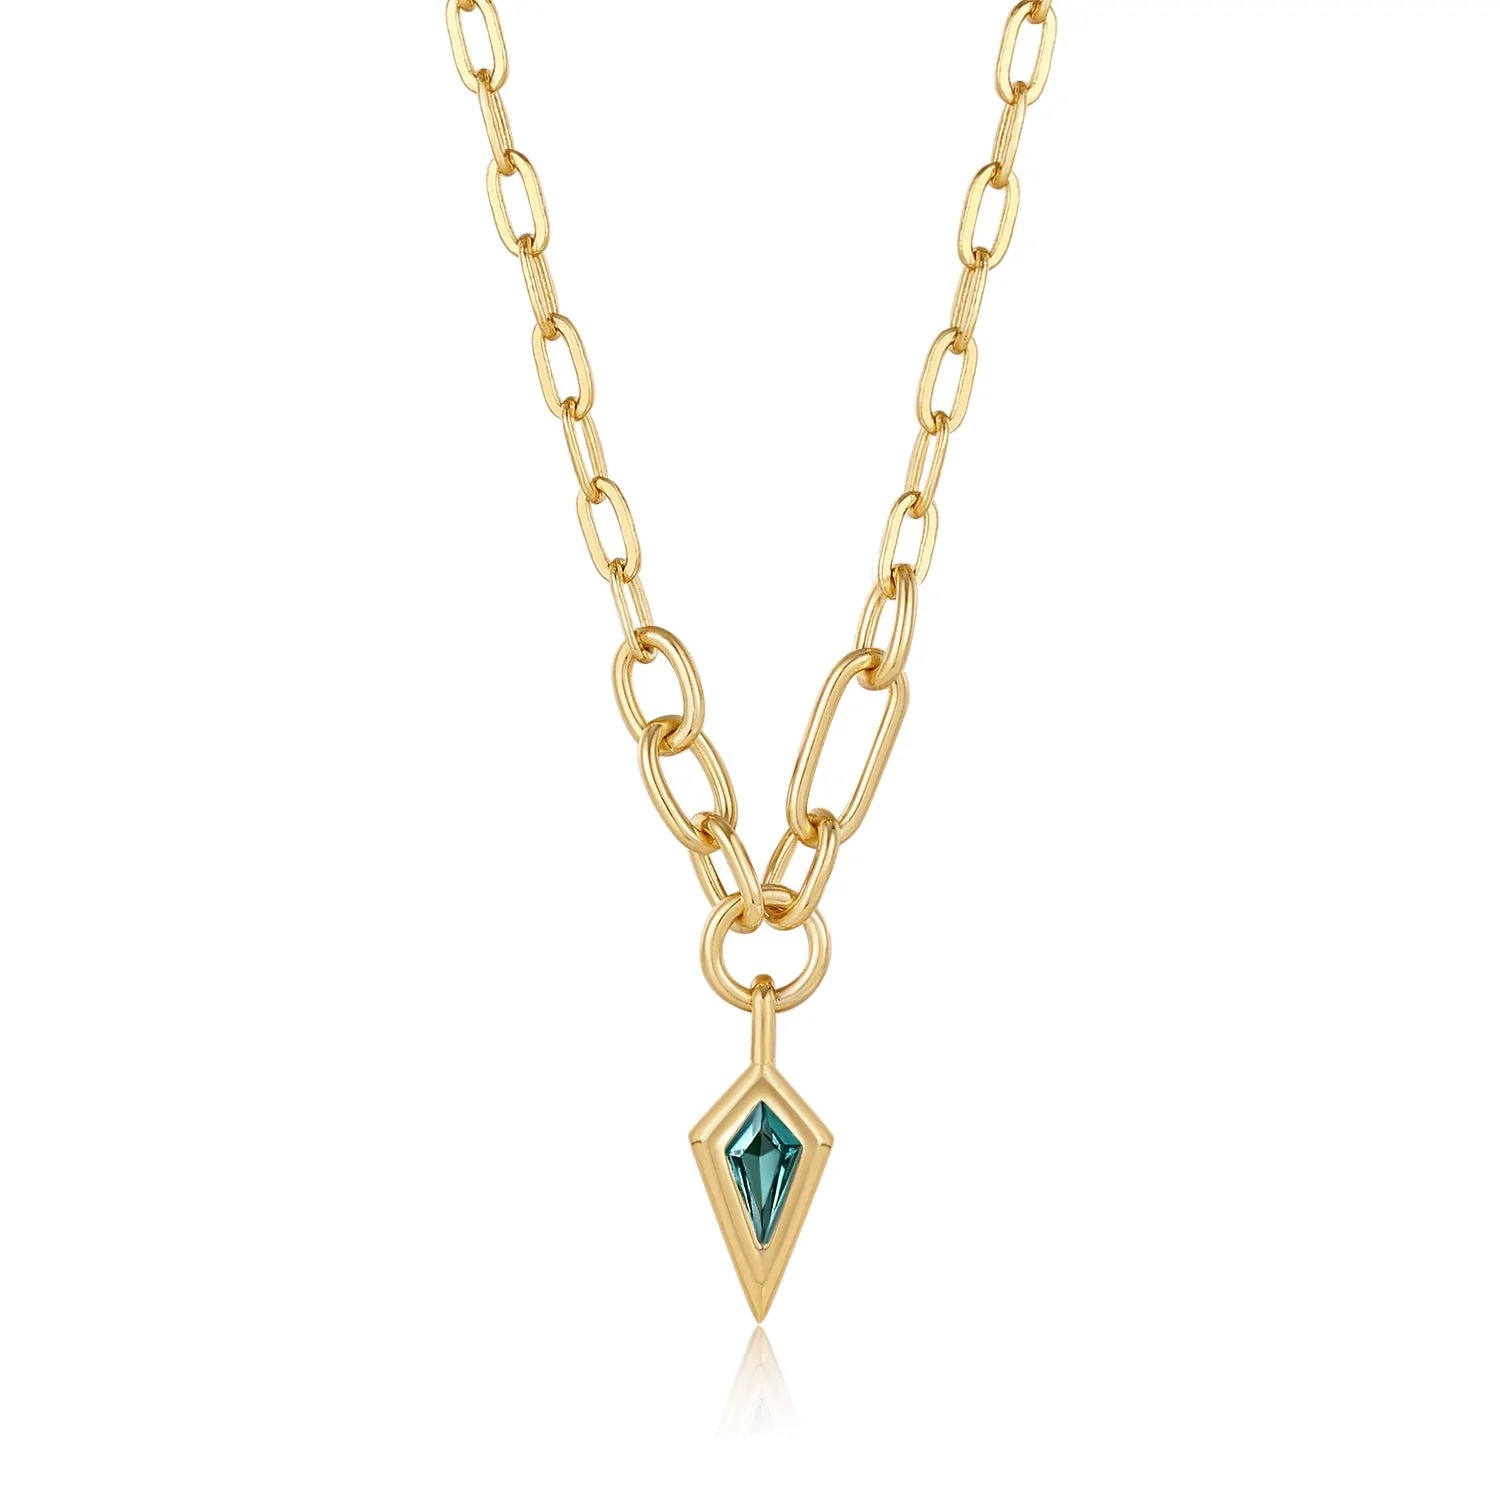 ANIA HAIE Teal Sparkle Drop Pendant Chunky Chain Necklace, Gold-plated